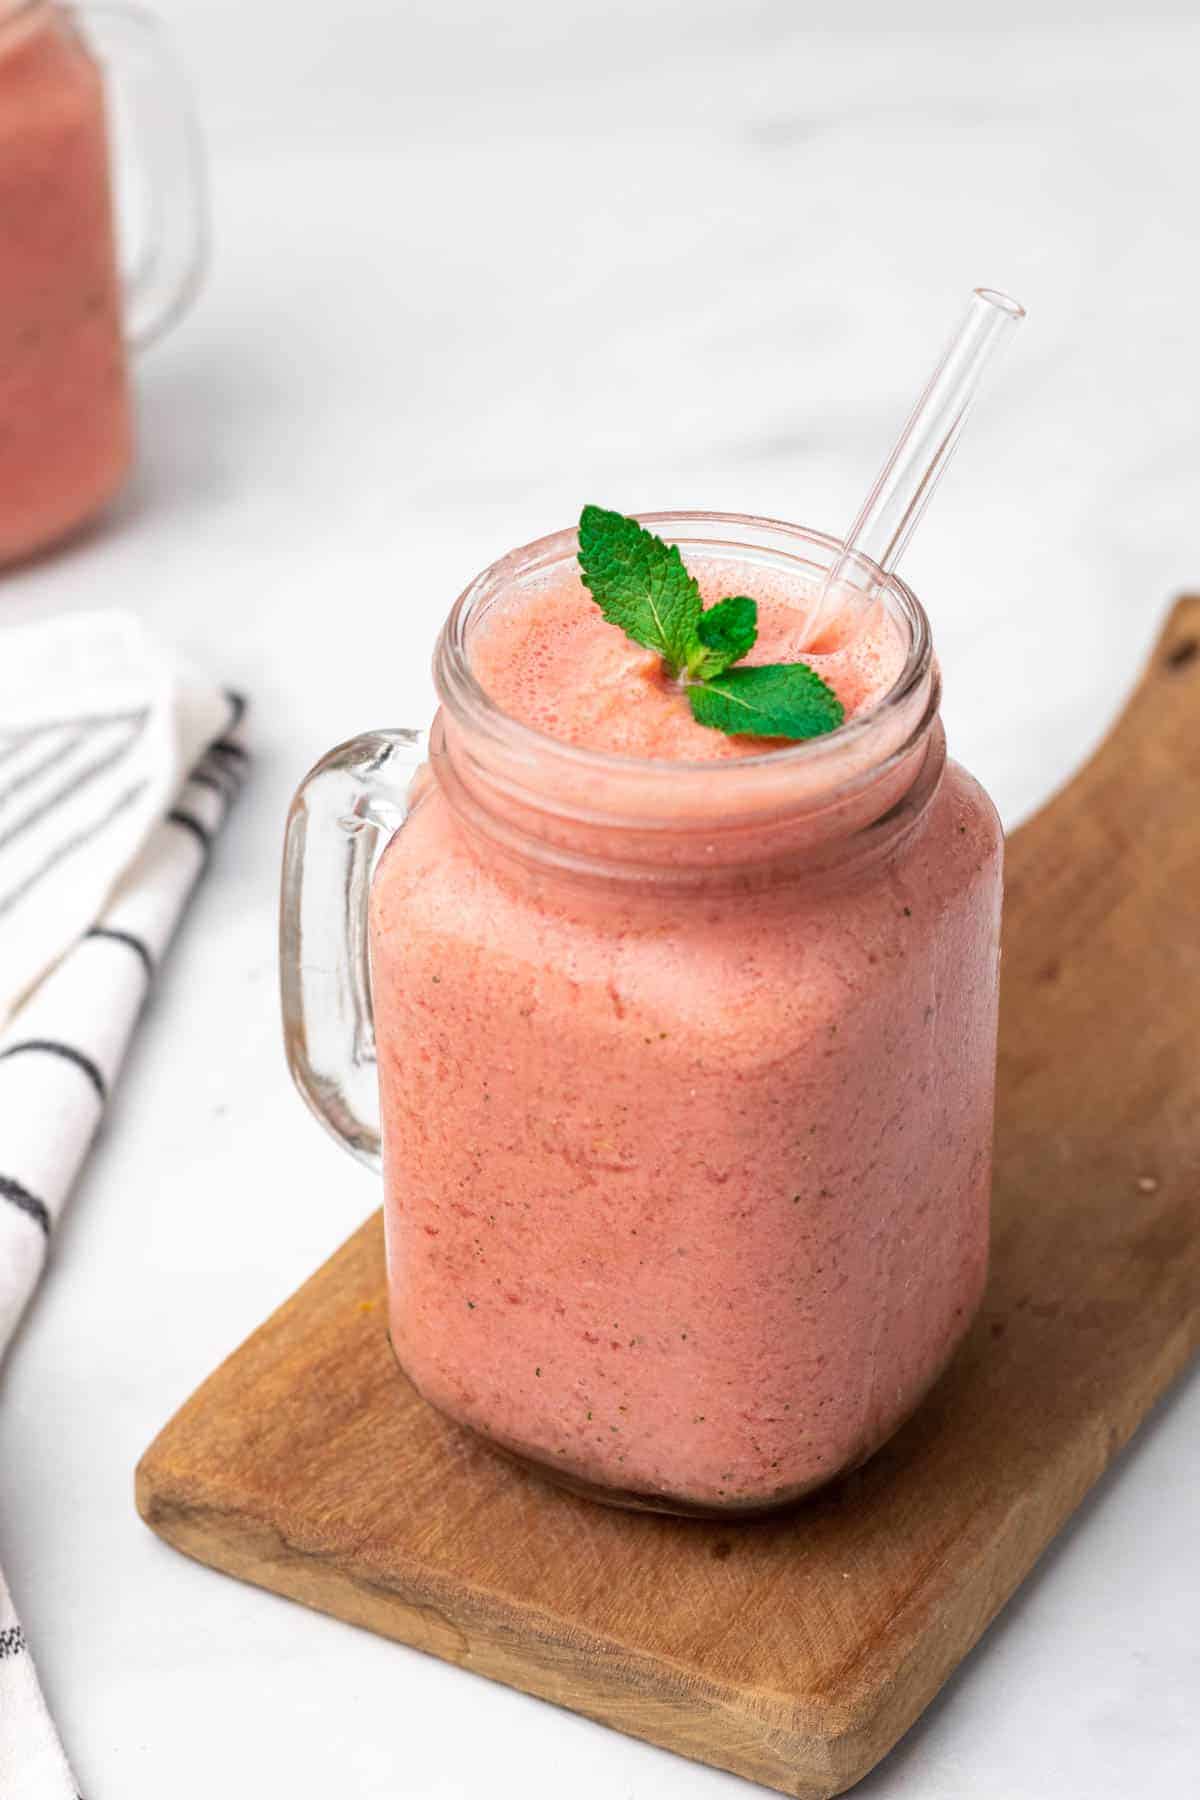 Smoothie in a glass jar garnished with fresh mint